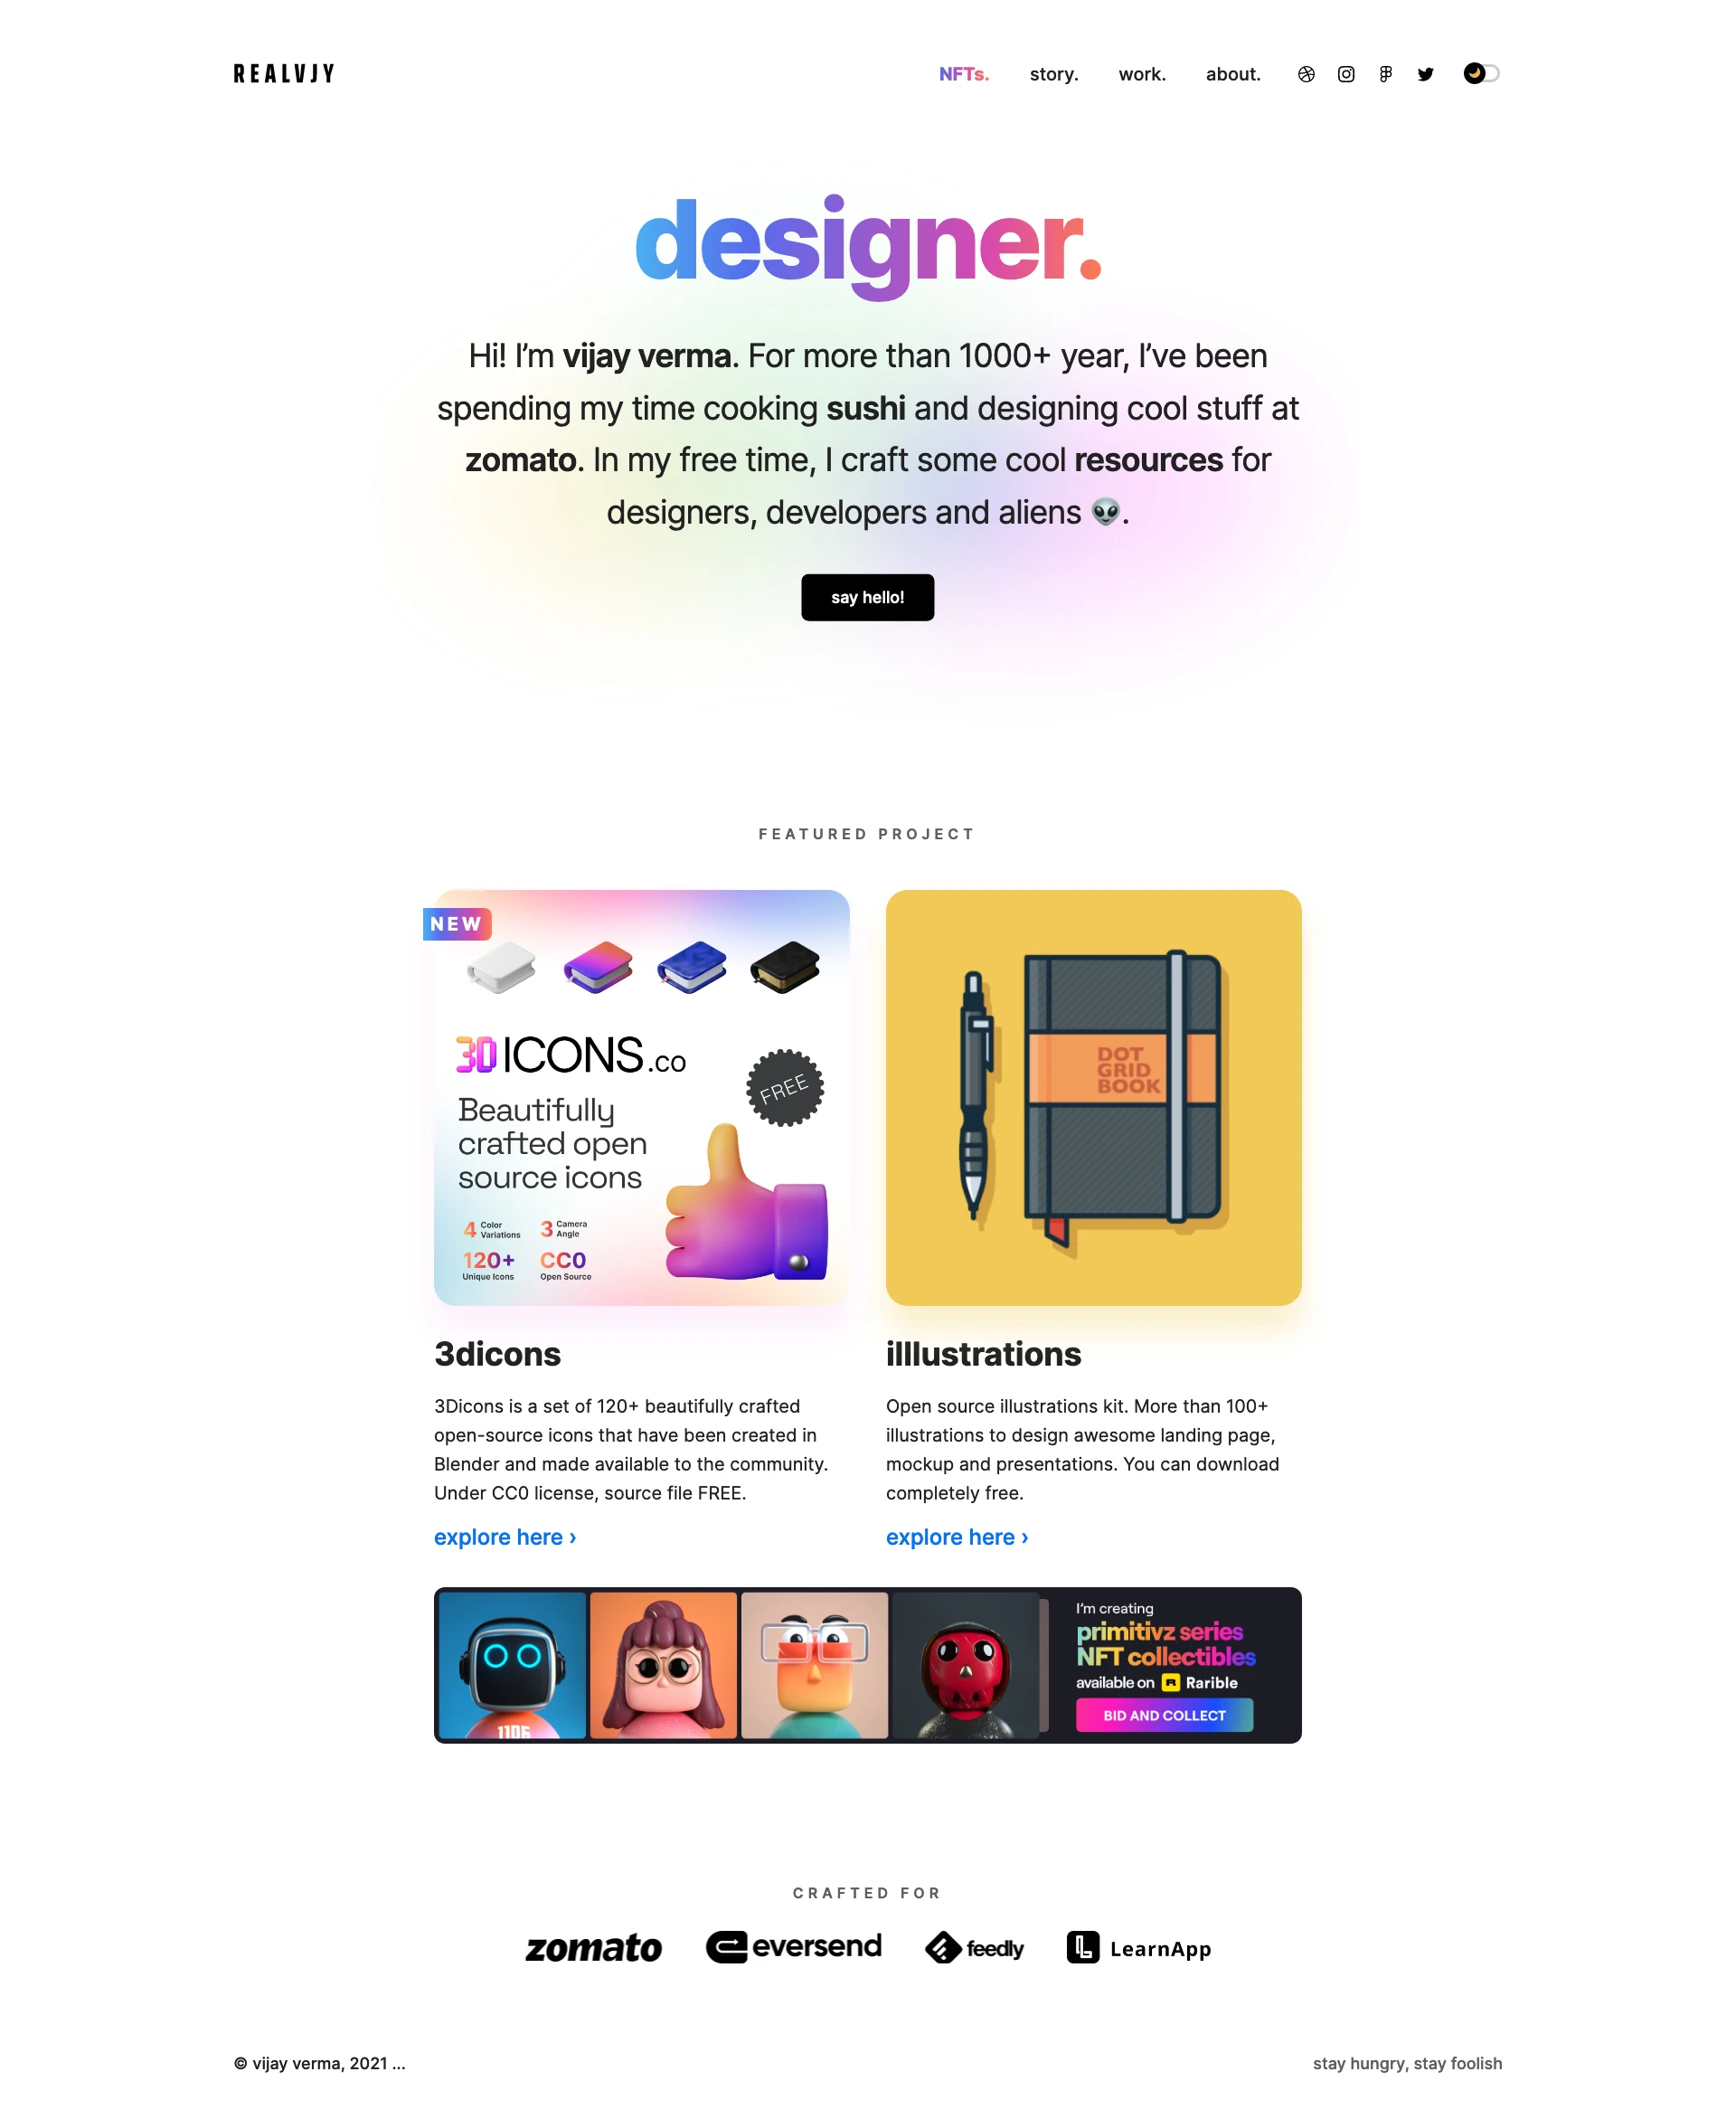 vijay verma Landing Page Example: A design chef leading and building inclusive design at zomato. Maker of Sushi Design System, illlustrations, uiprint, designletter...